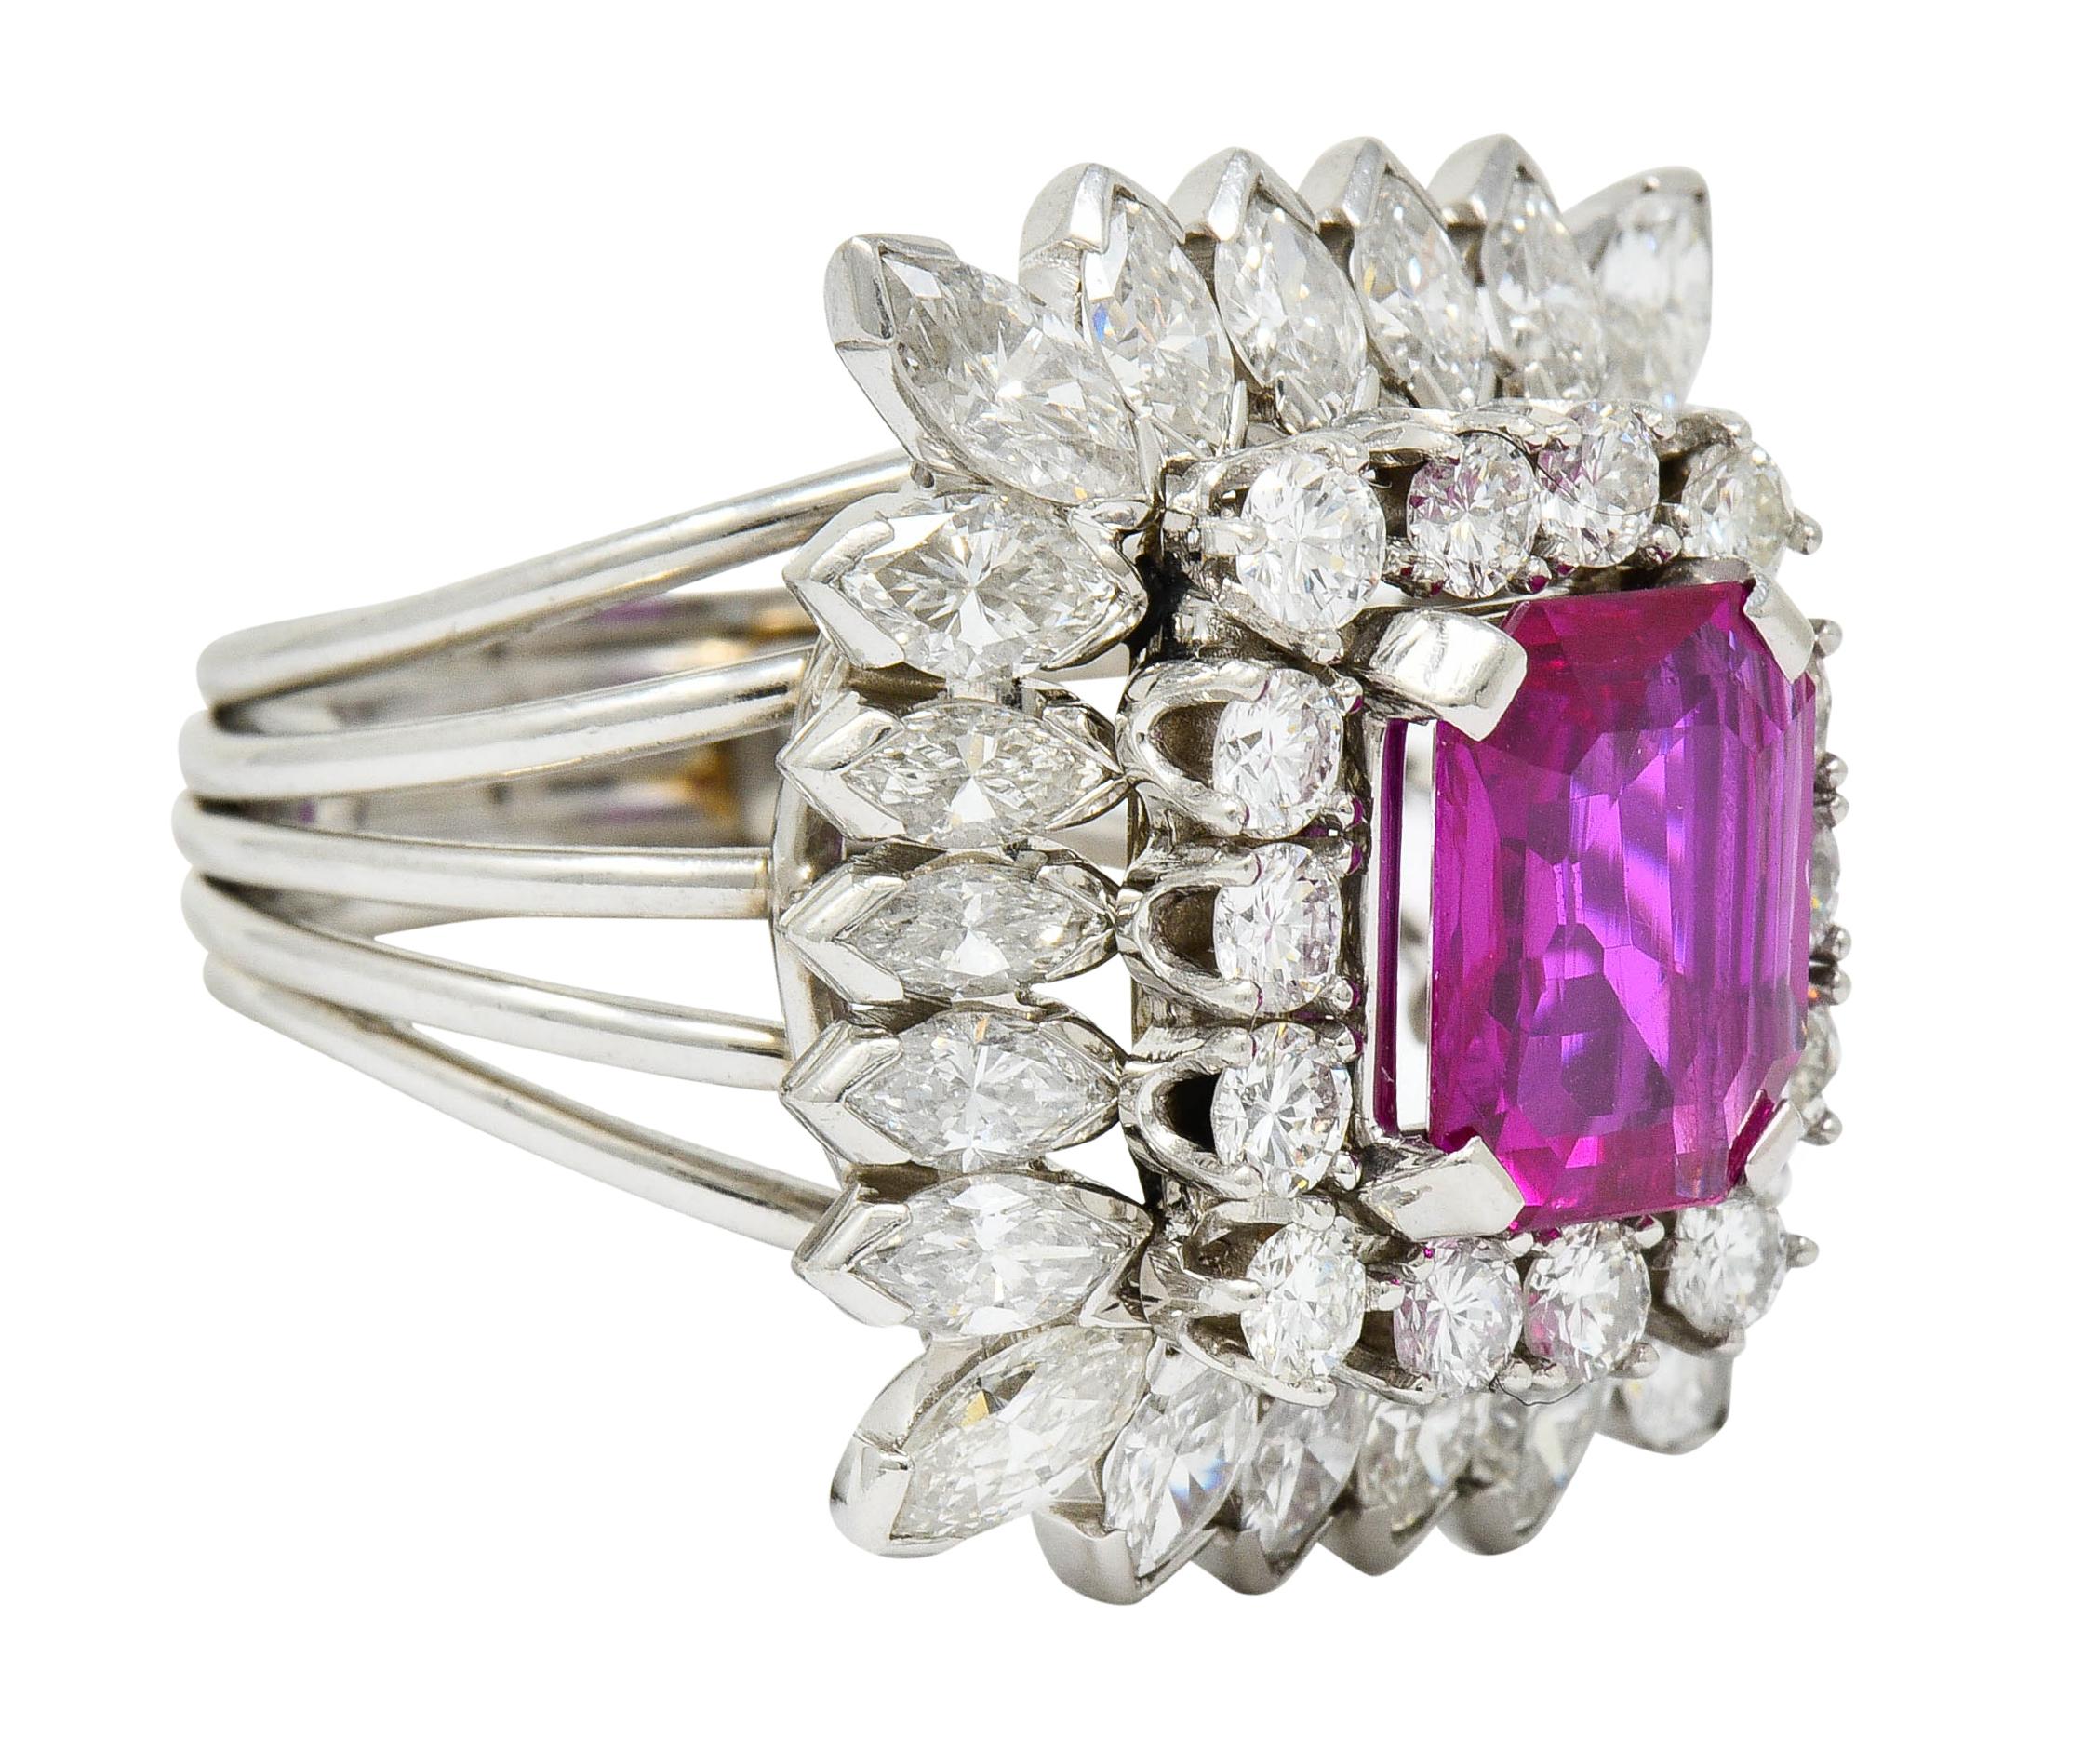 Cluster style ring centering an emerald cut Burma ruby weighing approximately 2.20 carats

Transparent and bright pinkish-red in color with no indications of heat

Surrounded by two tiers of round brilliant and marquis cut diamonds weighing in total